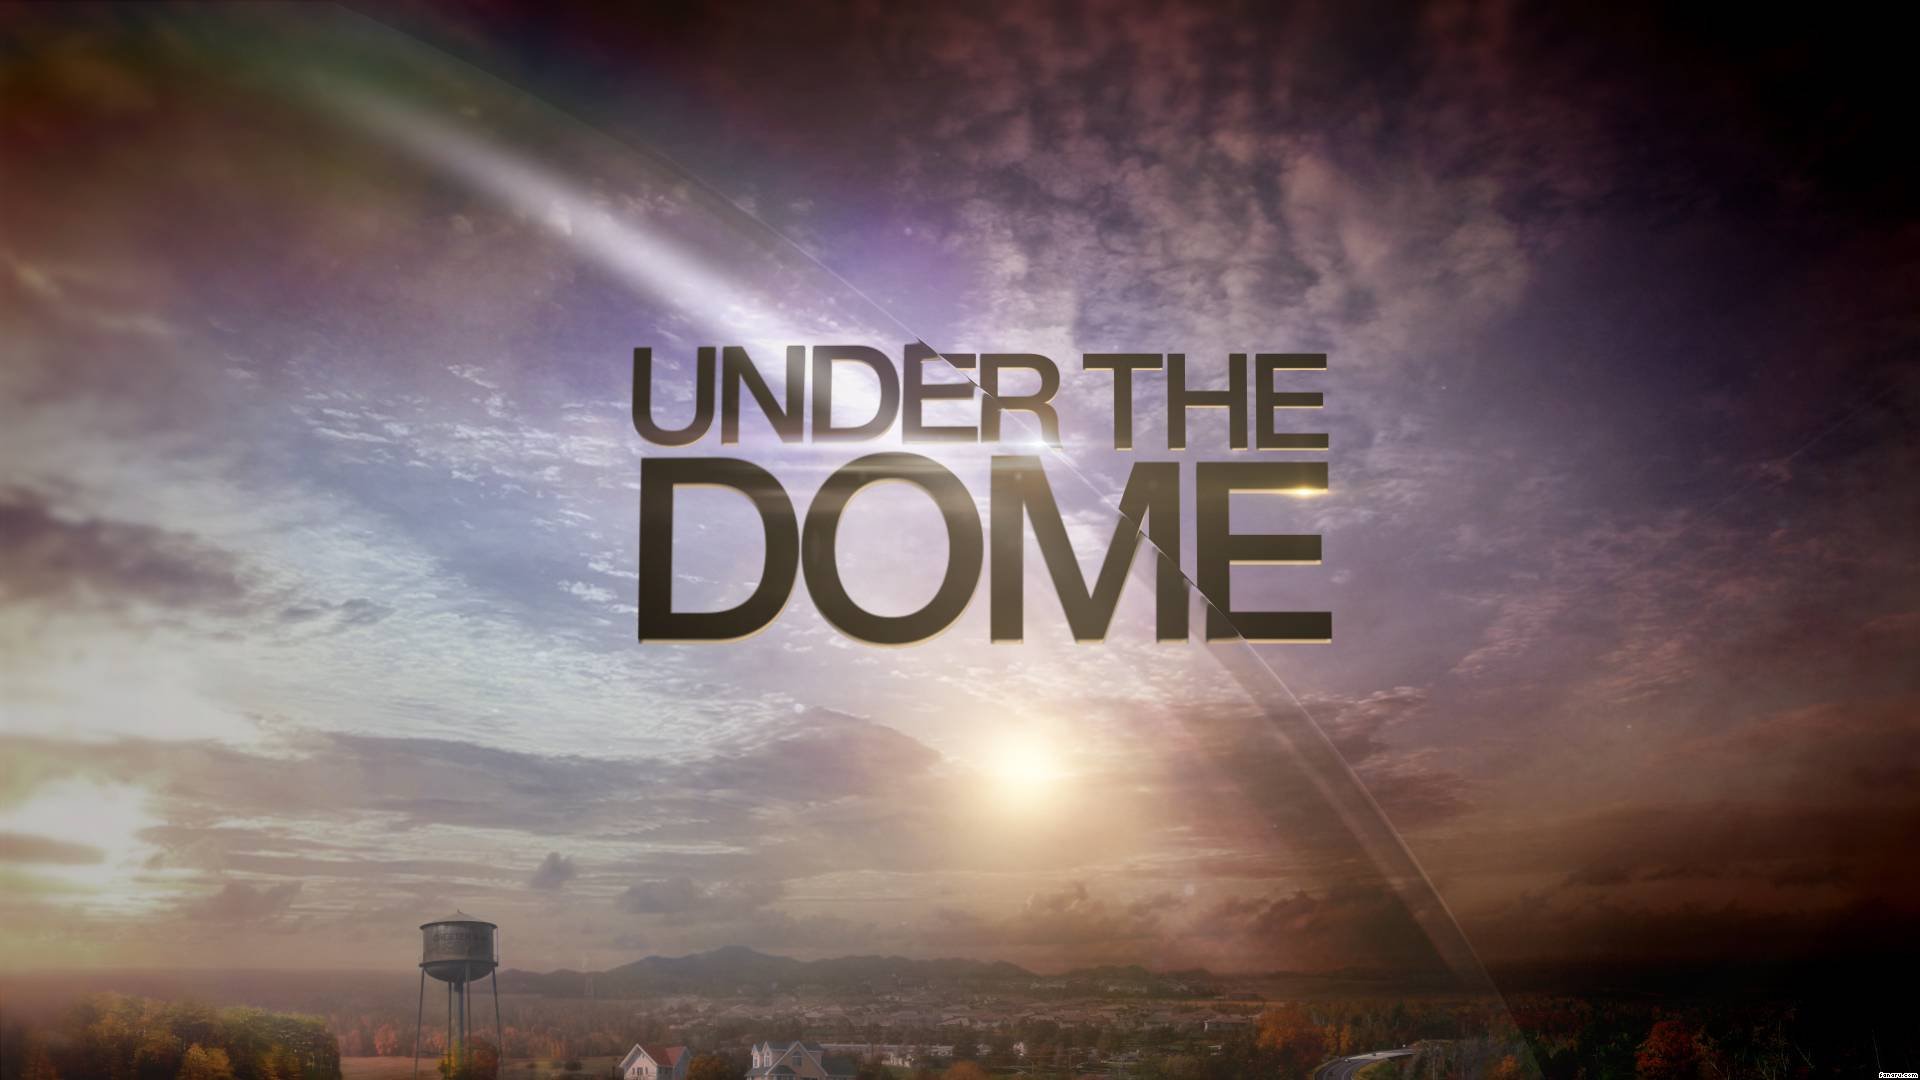 under, The, Dome, Drama, Mystery, Thriller, Sci fi, Series, Horror,  43 Wallpaper